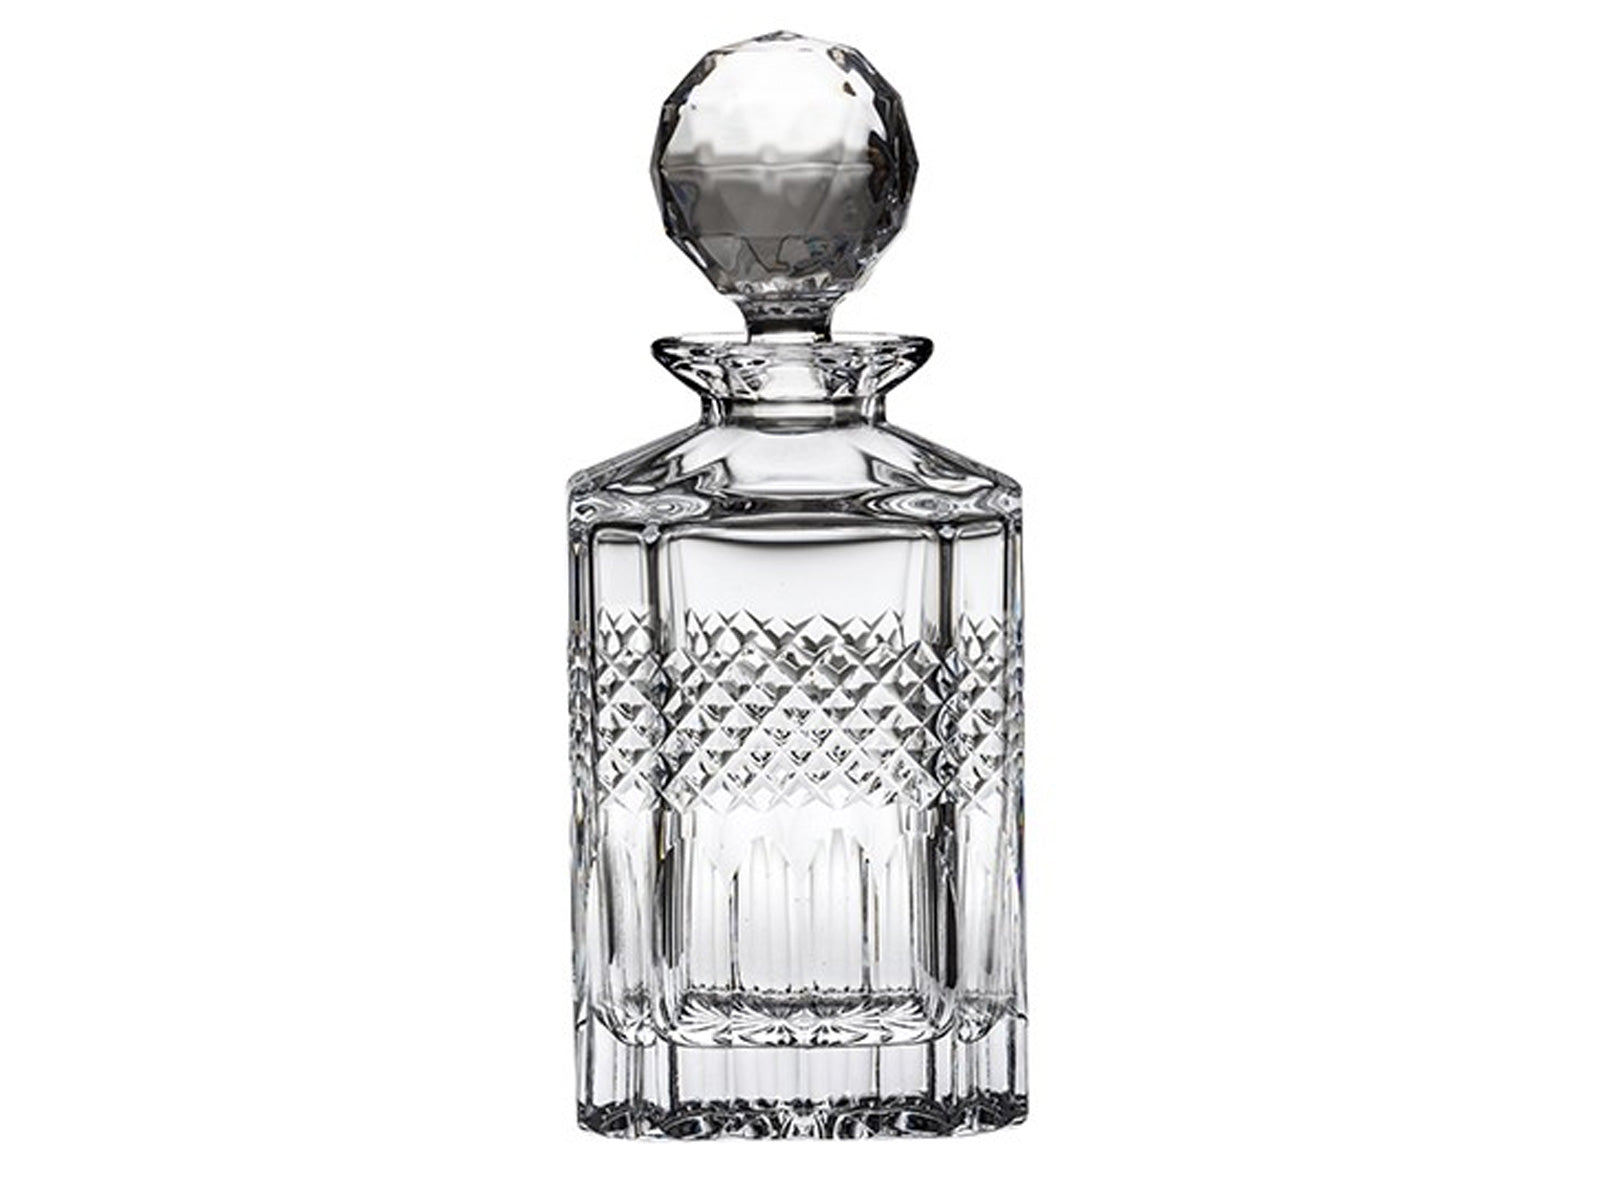 A square crystal spirit decanter with art-deco style panels cut into the bottom with a band of diamonds above it and a smooth top. It has a golf-ball style stopper.